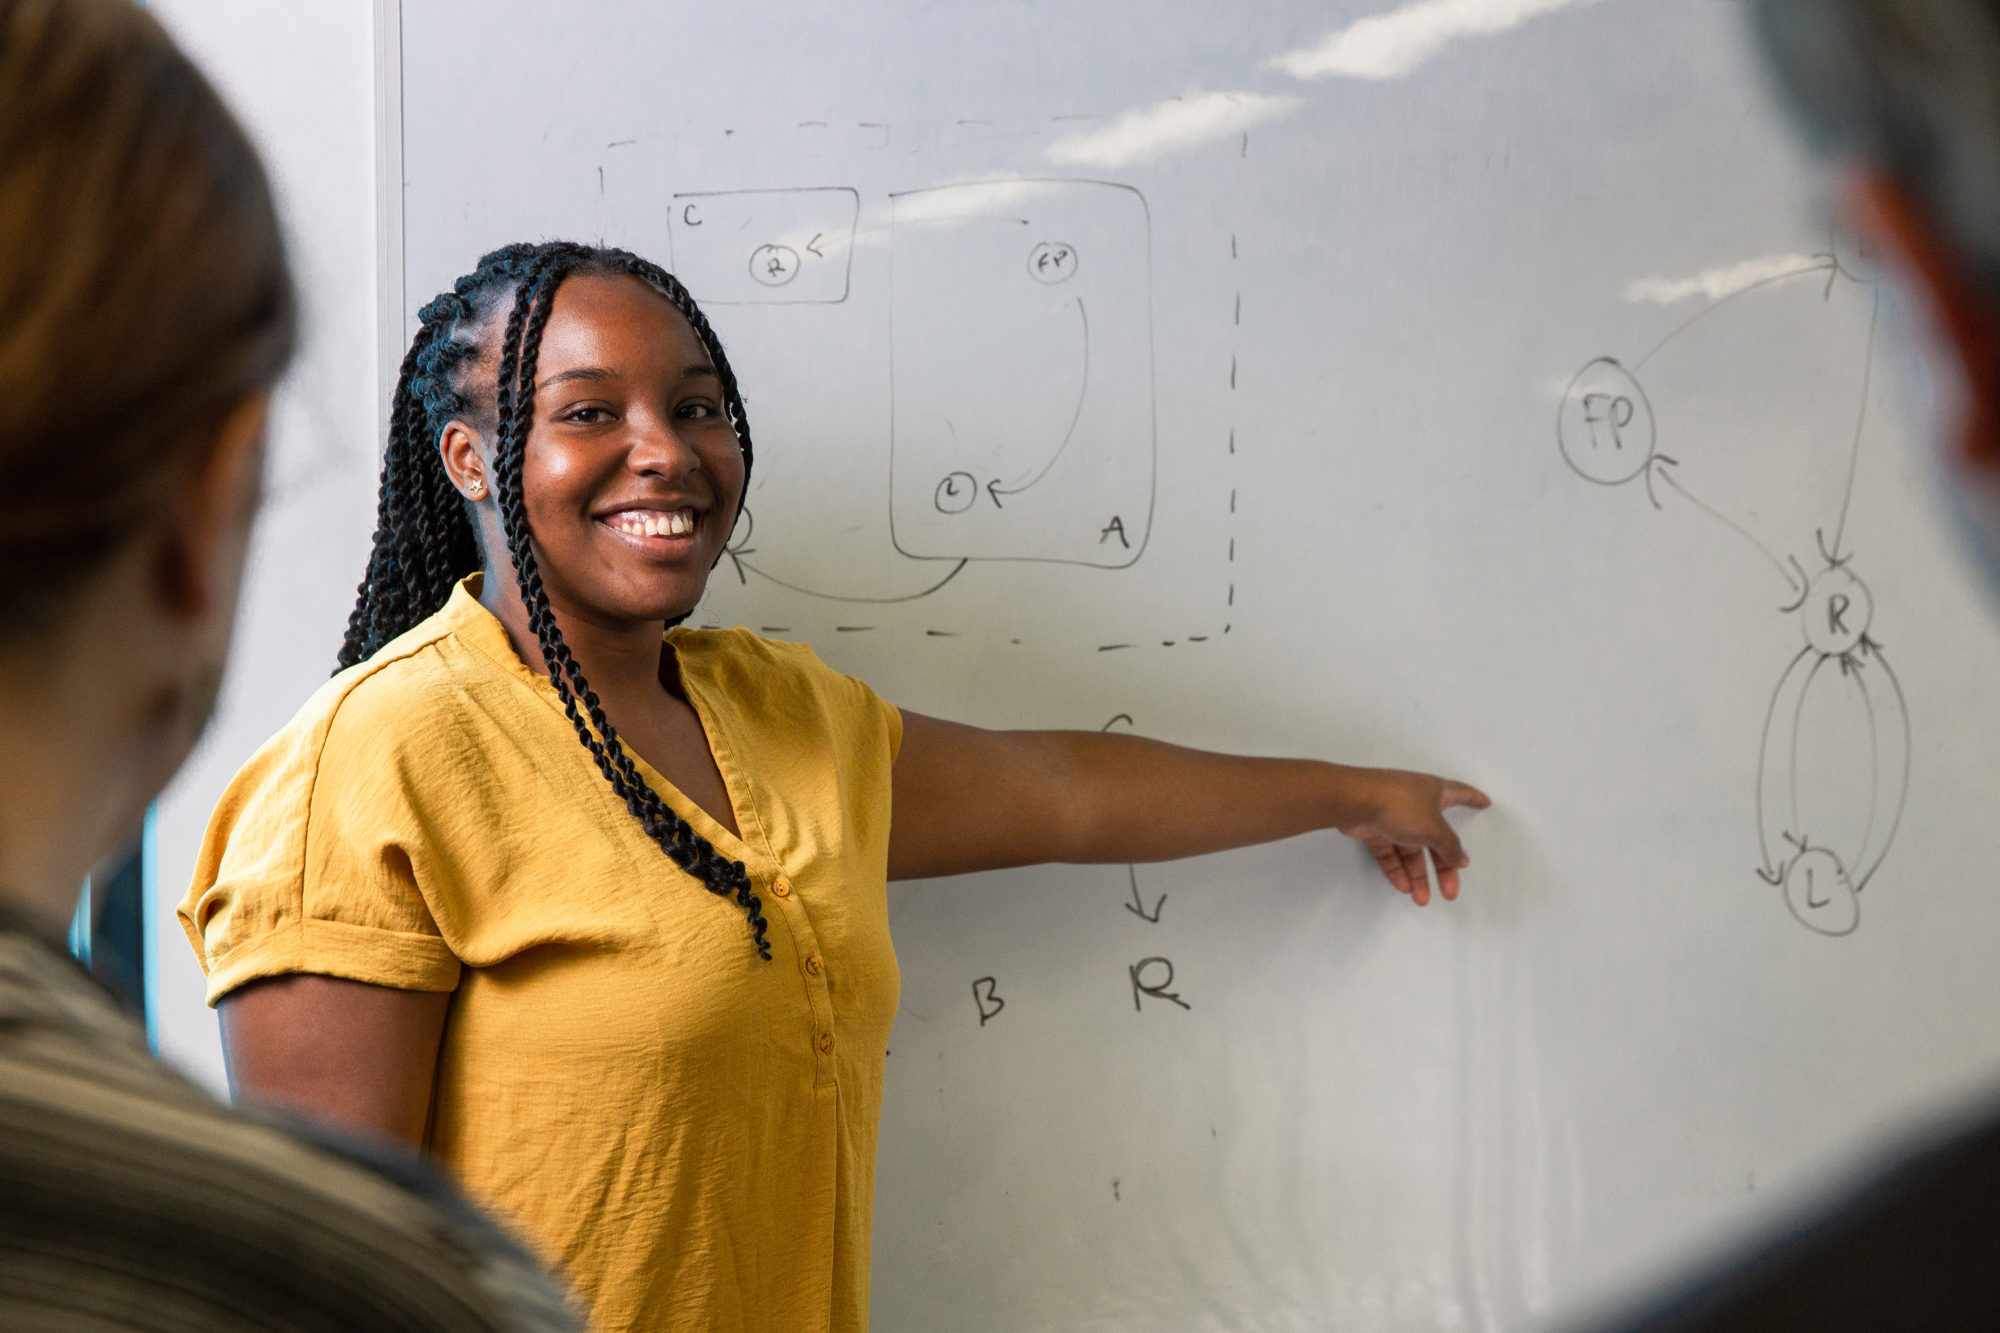 A female employee of Slingshot Simulations pointing at an equation on a whiteboard and smiling widely.